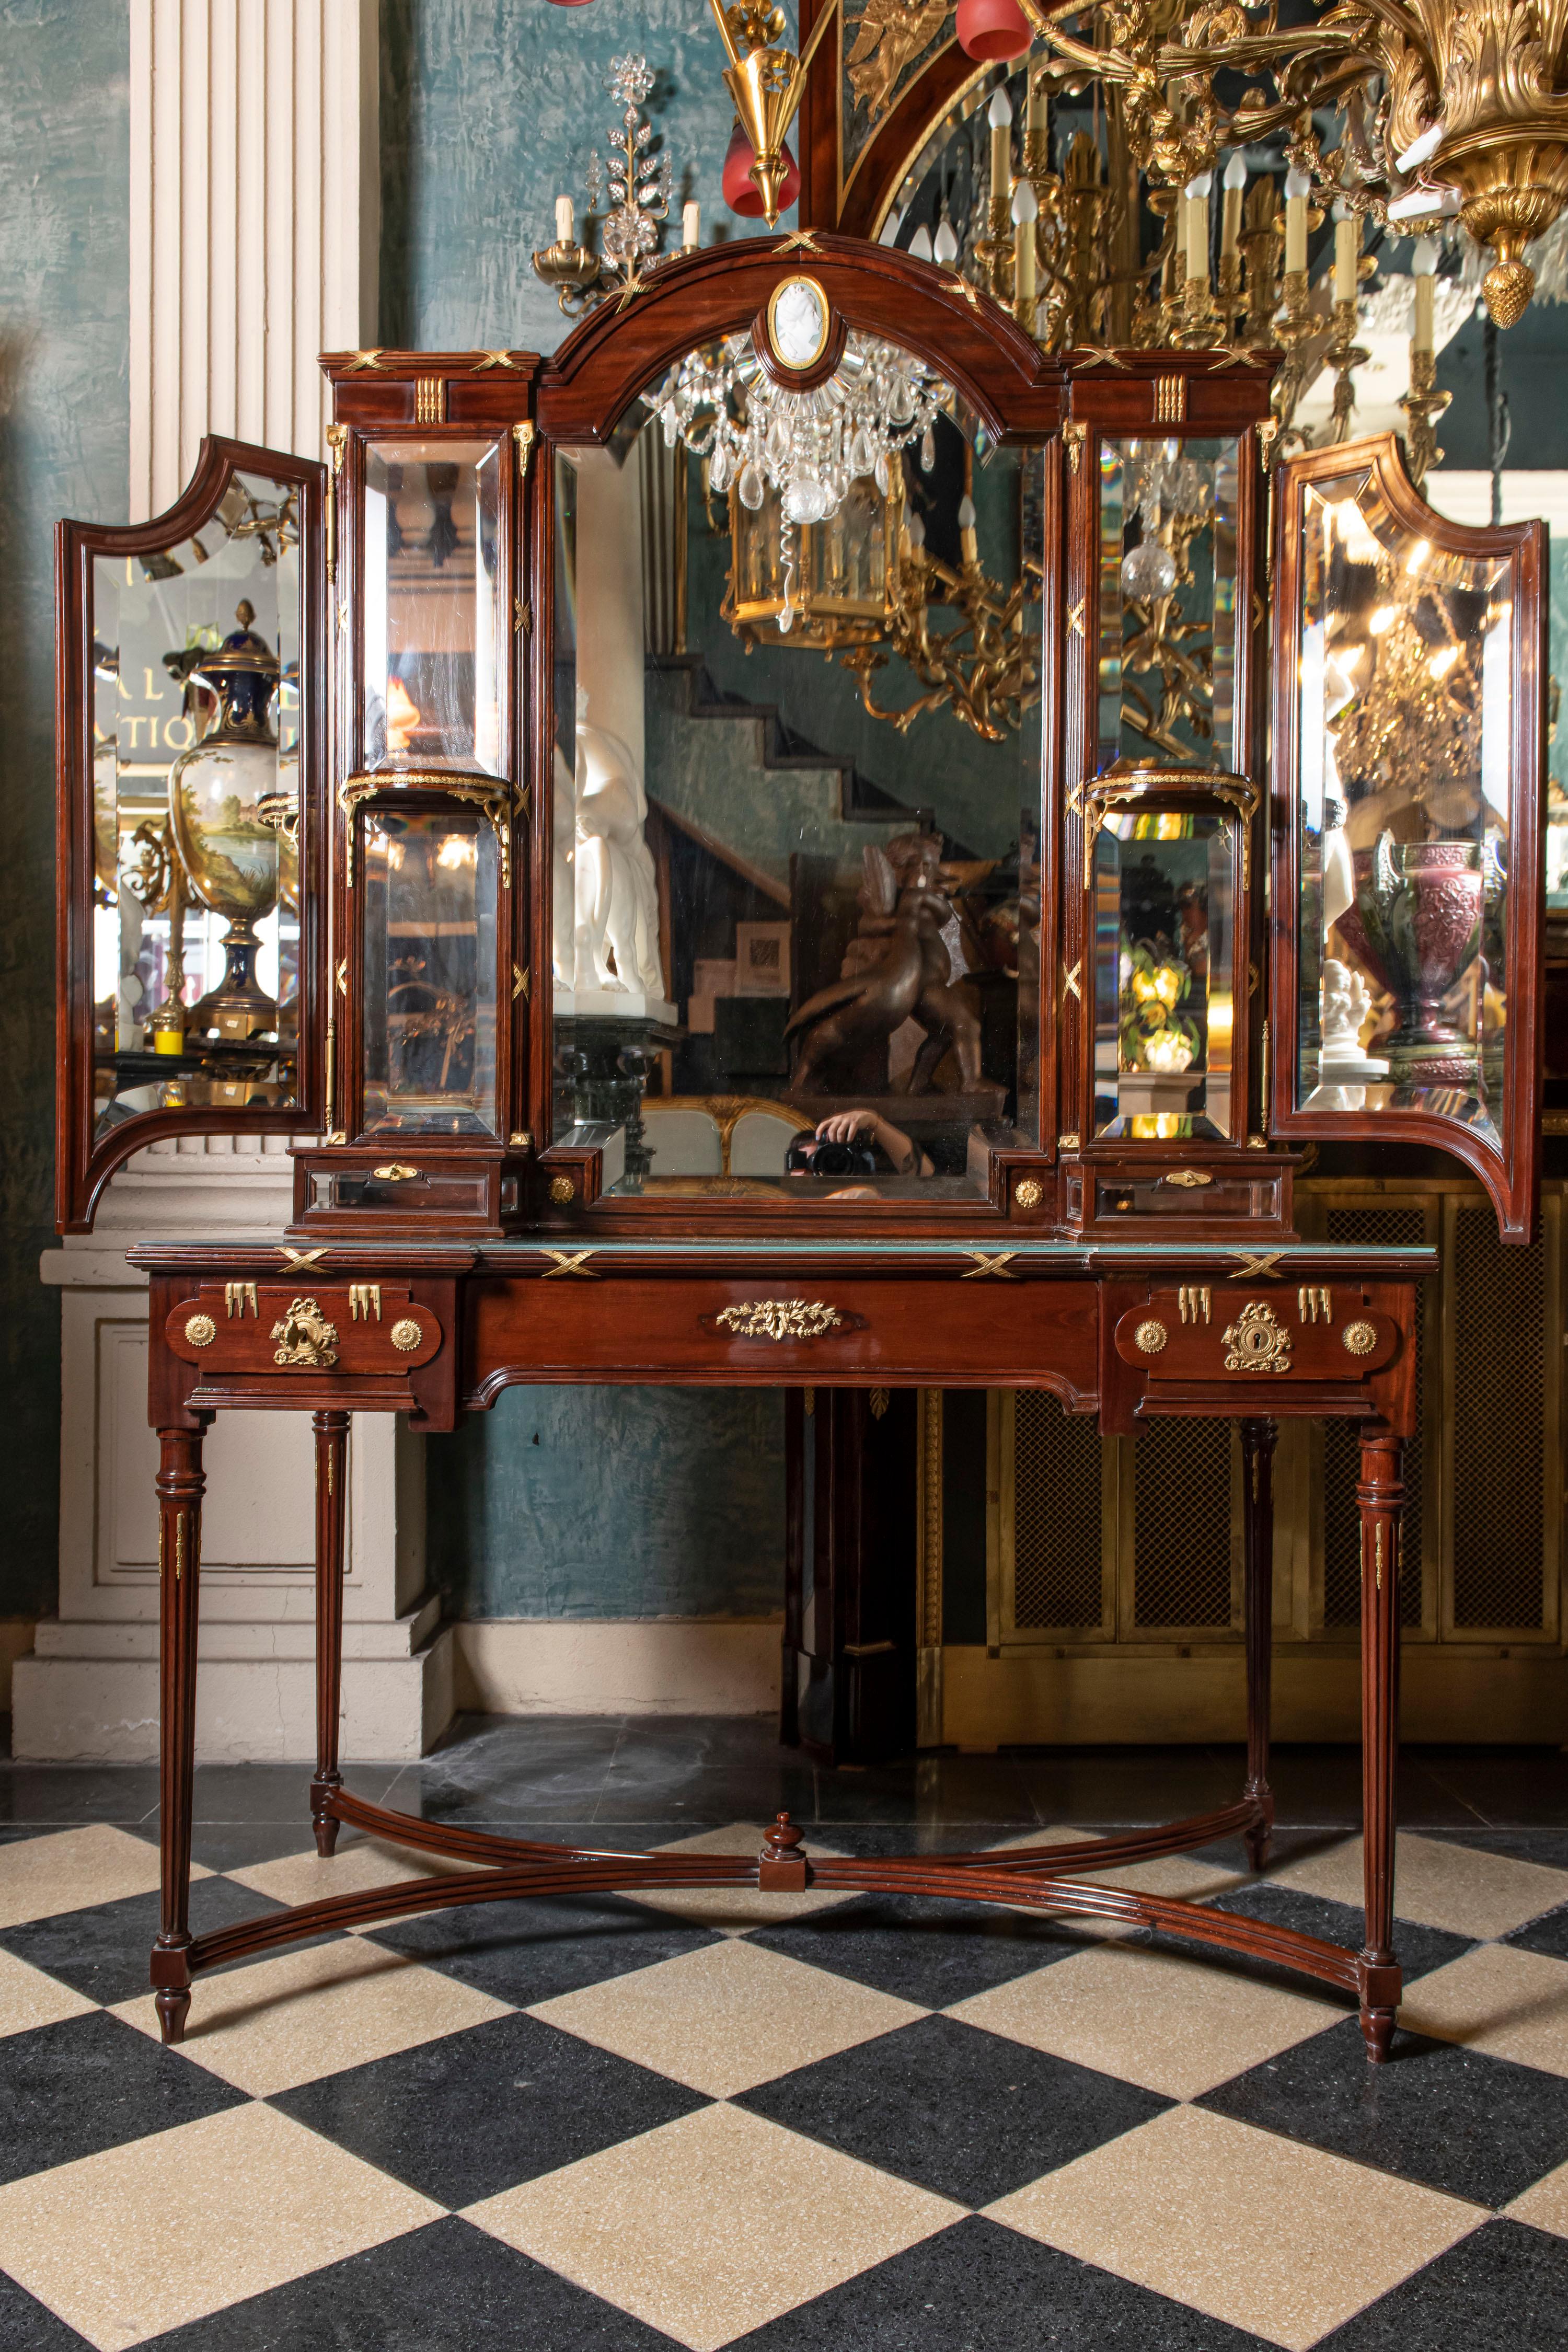 Set of one vanity desk, one chair, two nightstands and one wardrobe in gilt bronze, marble, porcelain and wood. France, late 19th century.

Dimensions of the vanity desk: 203 cm height, 185 cm width, 65 cm depth.
Dimensions of the chair: 90 cm